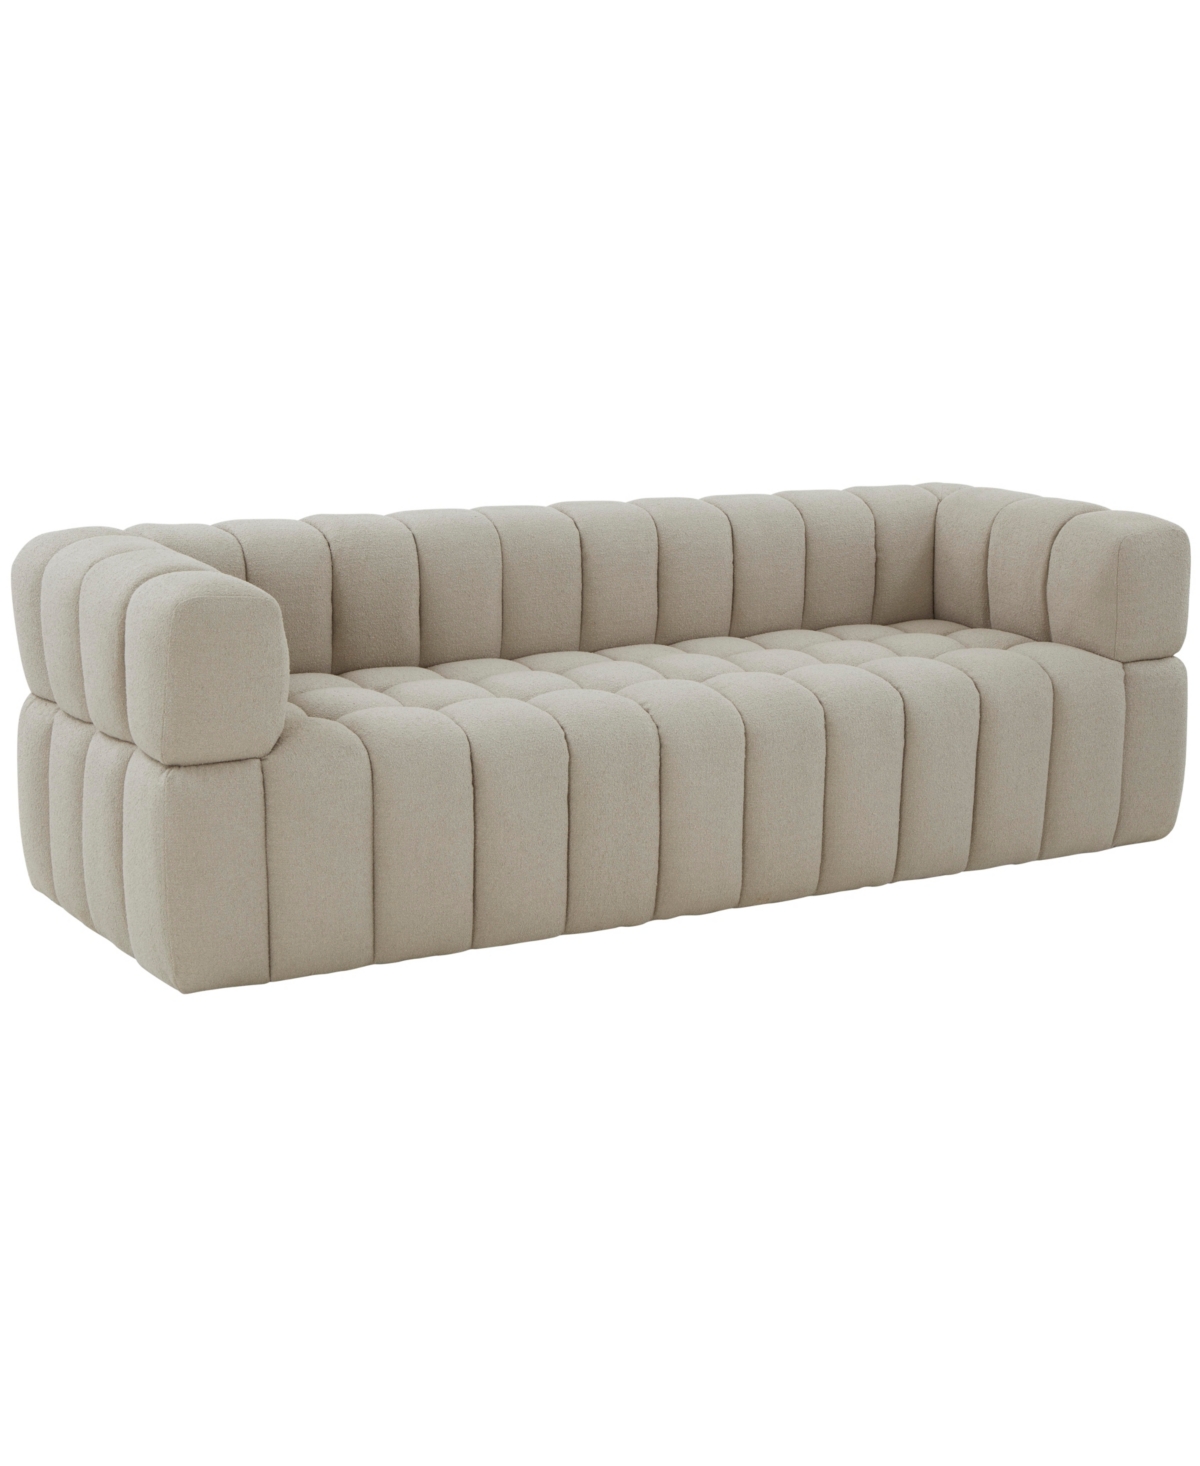 Safavieh Calyna 90" Channel Tufted Boucle Sofa In Light Gray